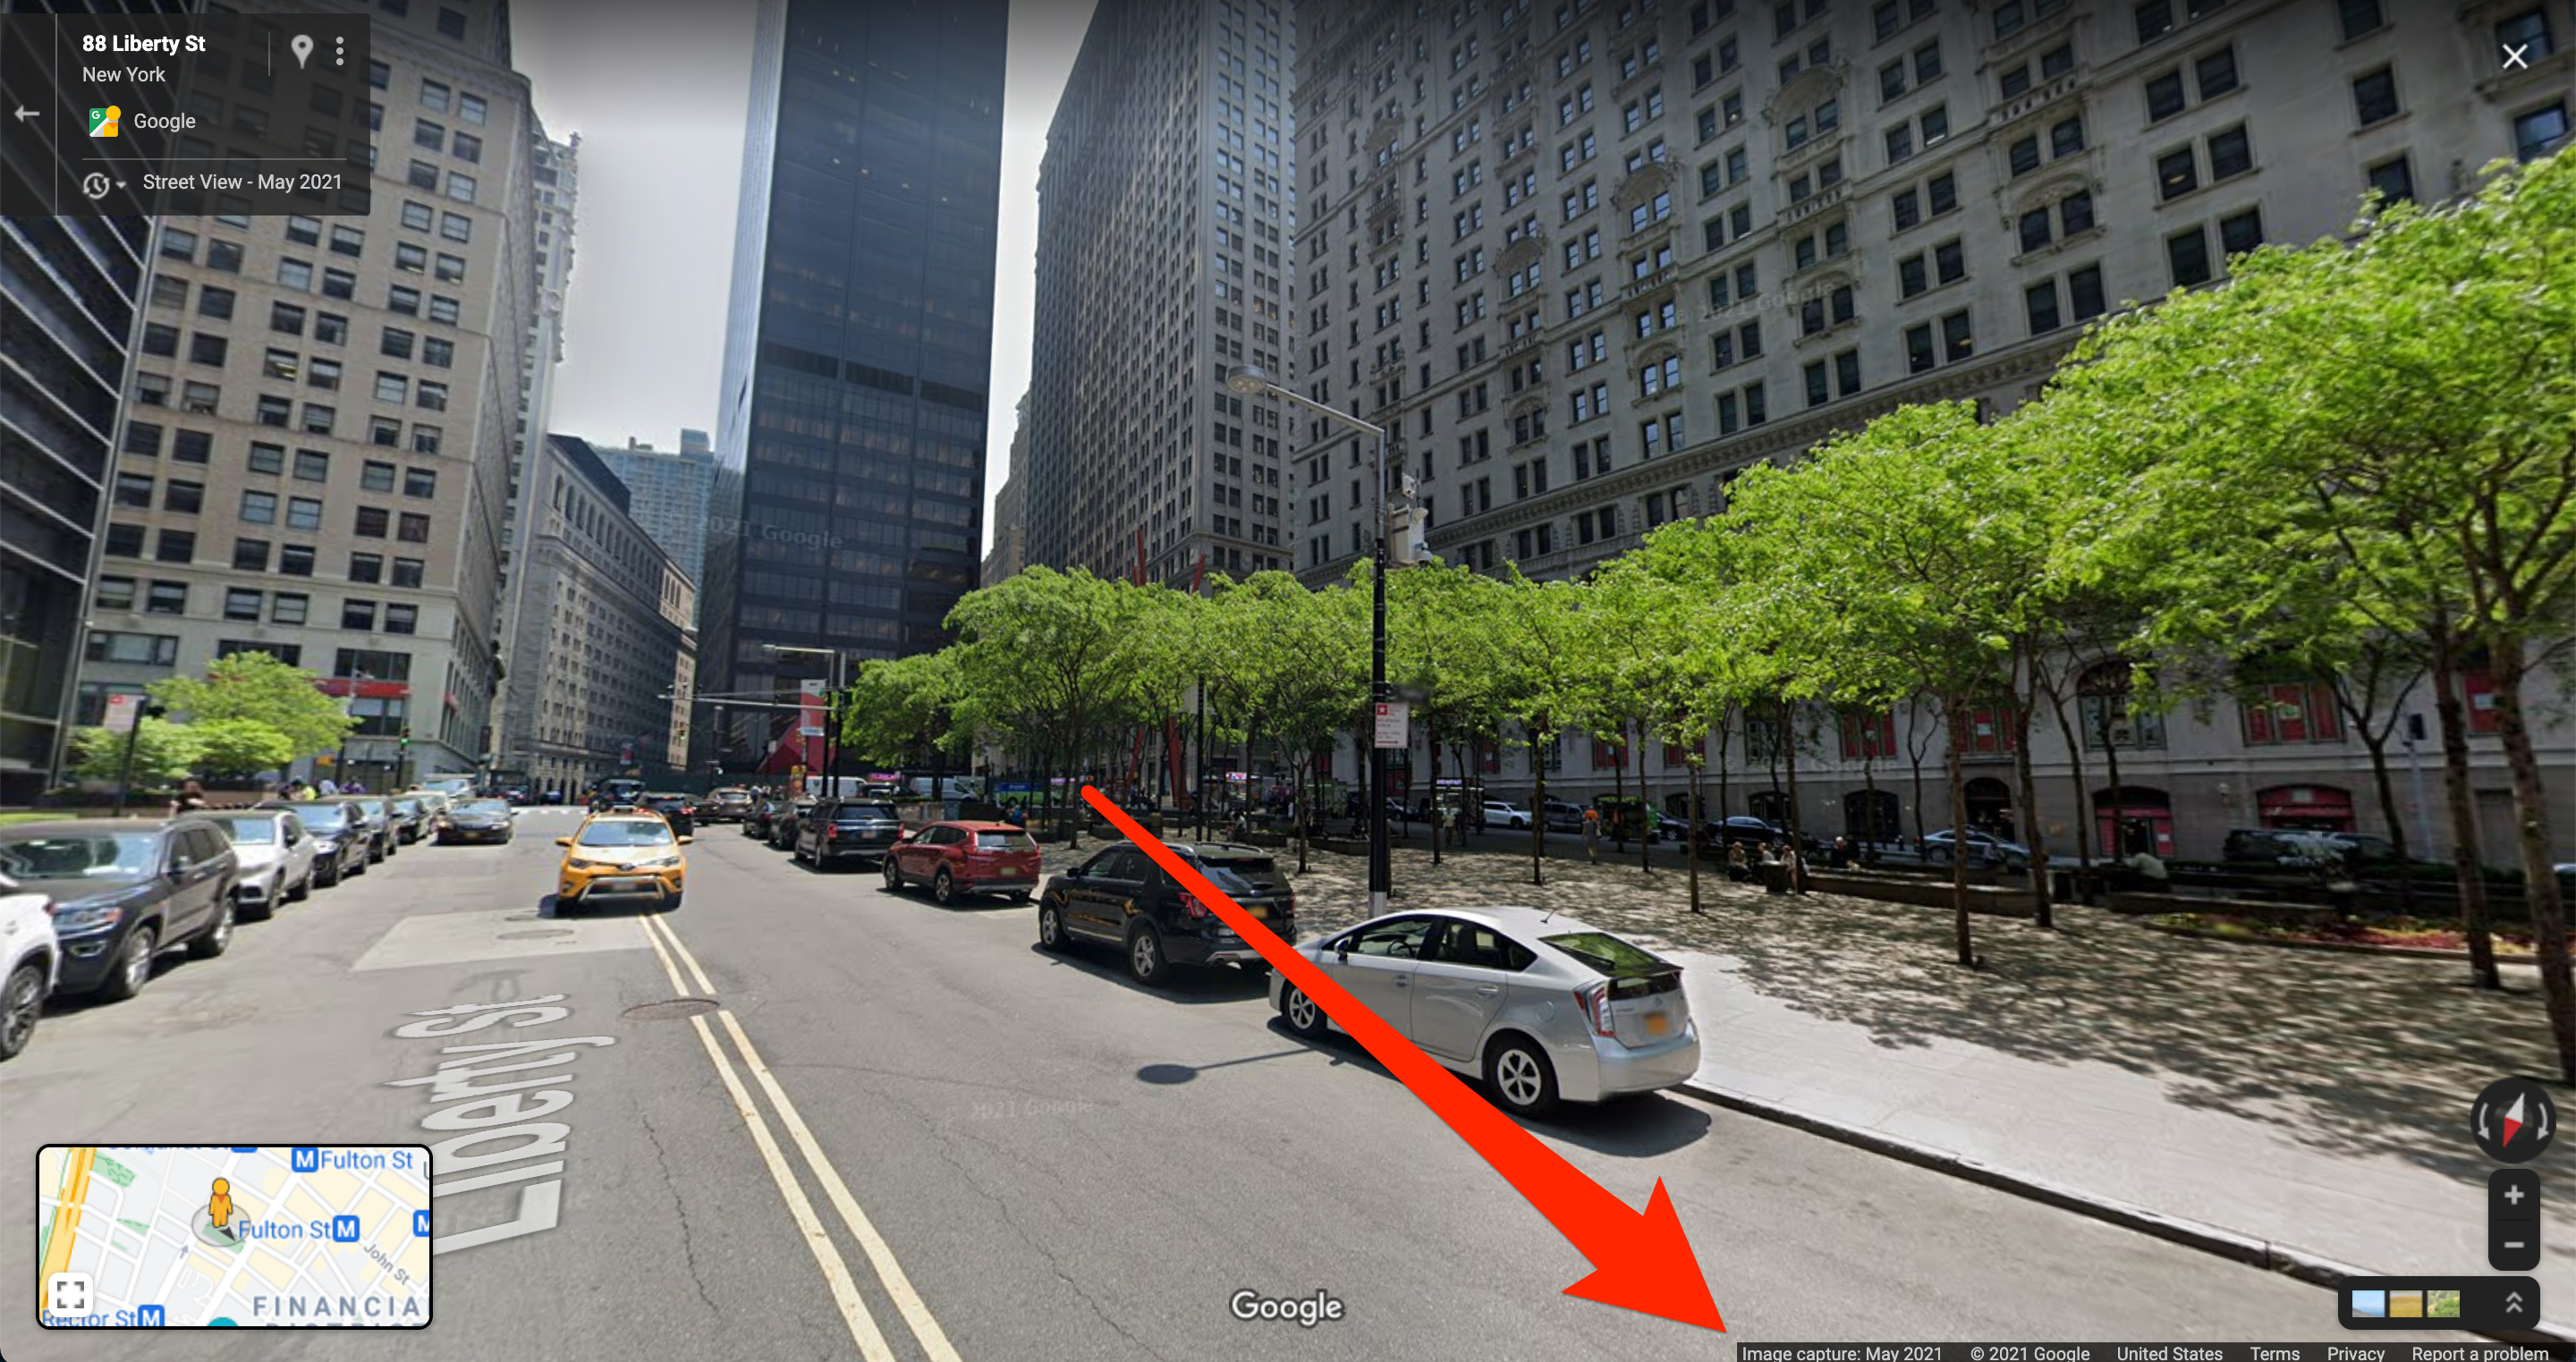 A Google Maps Street View shot of Zuccotti Park in New York City.